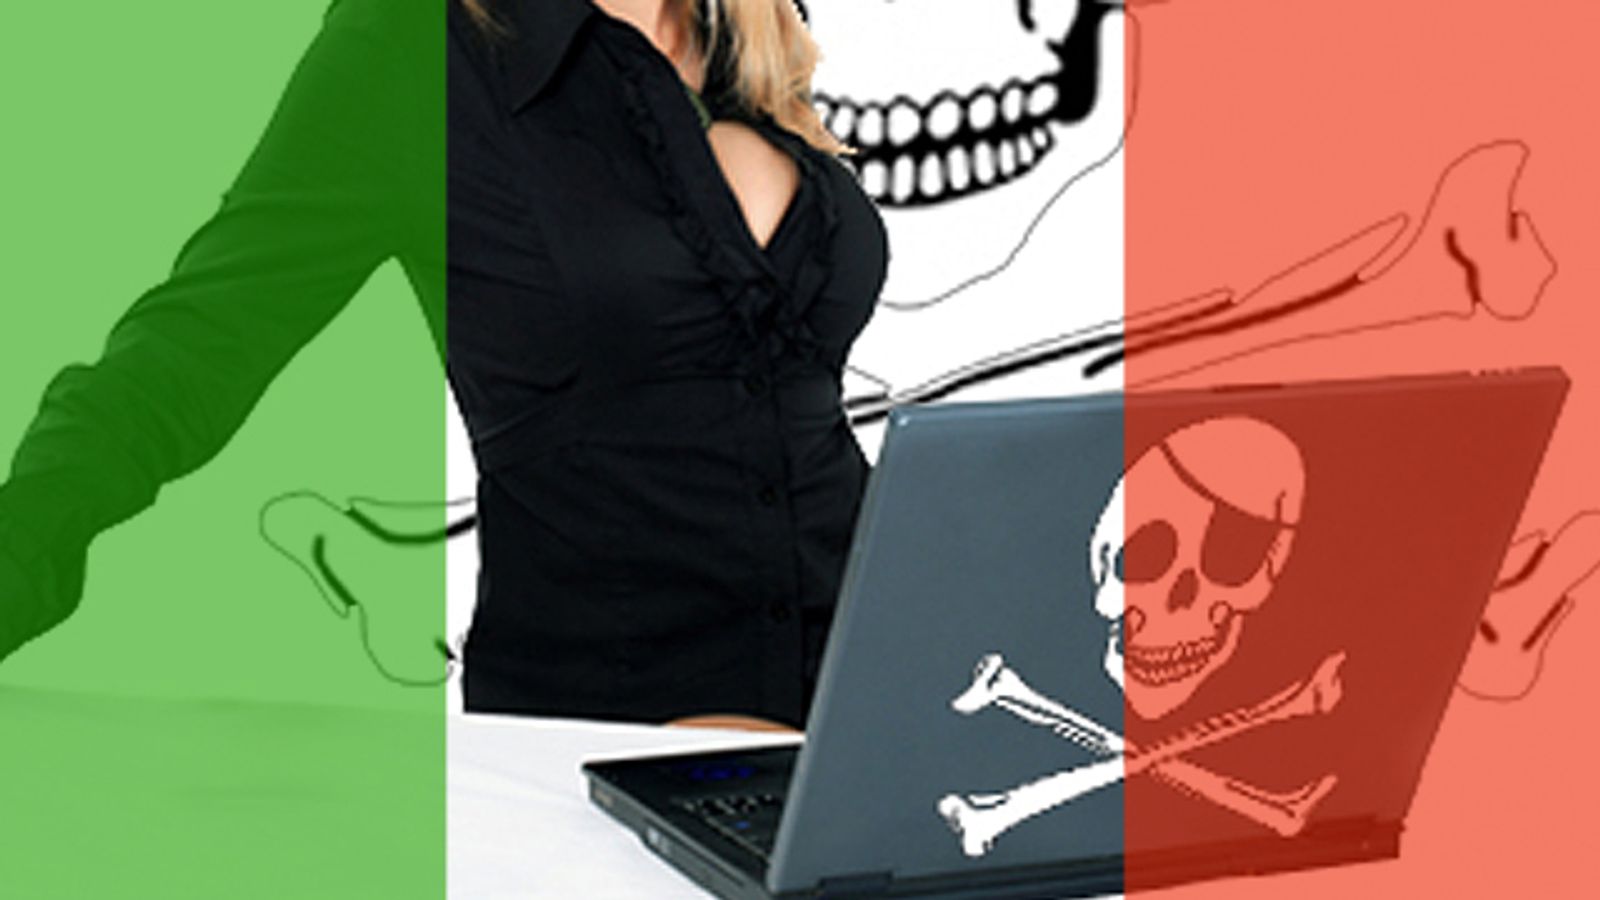 Italy Also Wants a Pirate Bay Trial